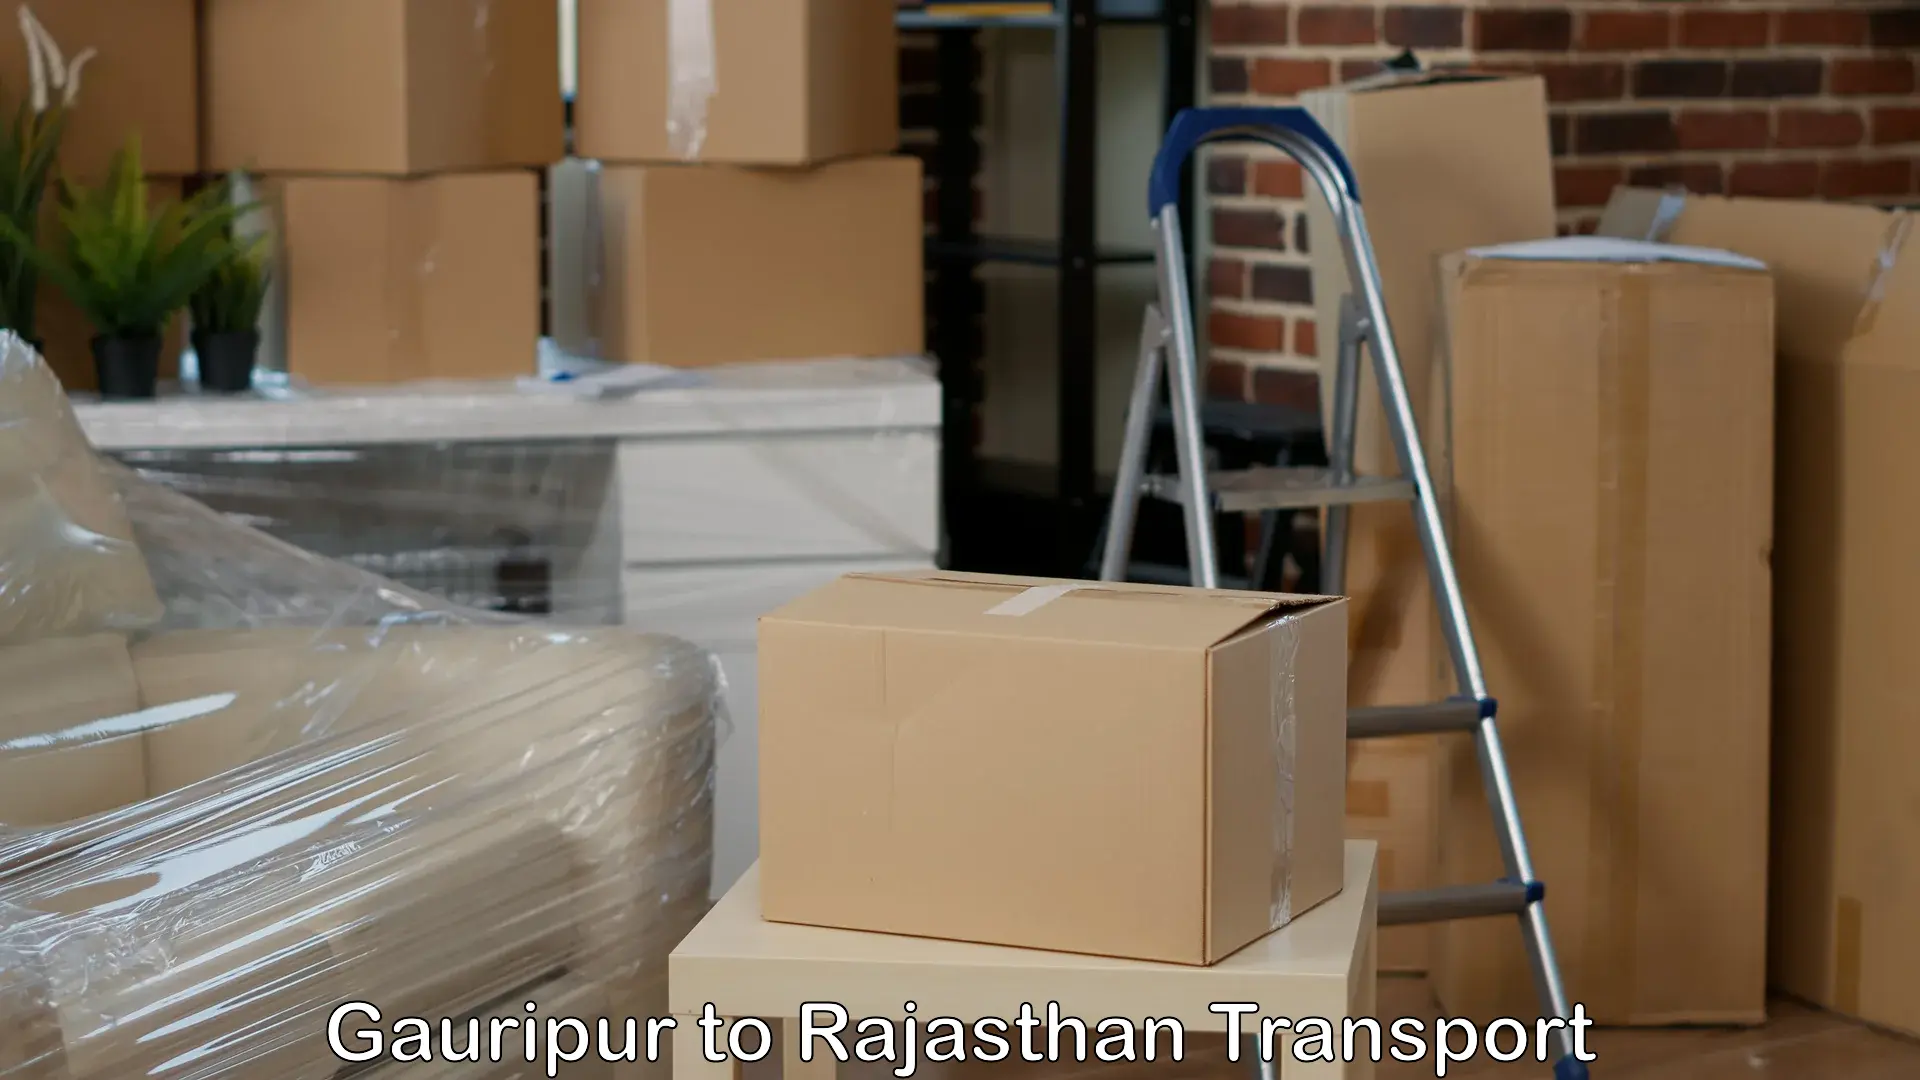 Commercial transport service Gauripur to Bharatpur